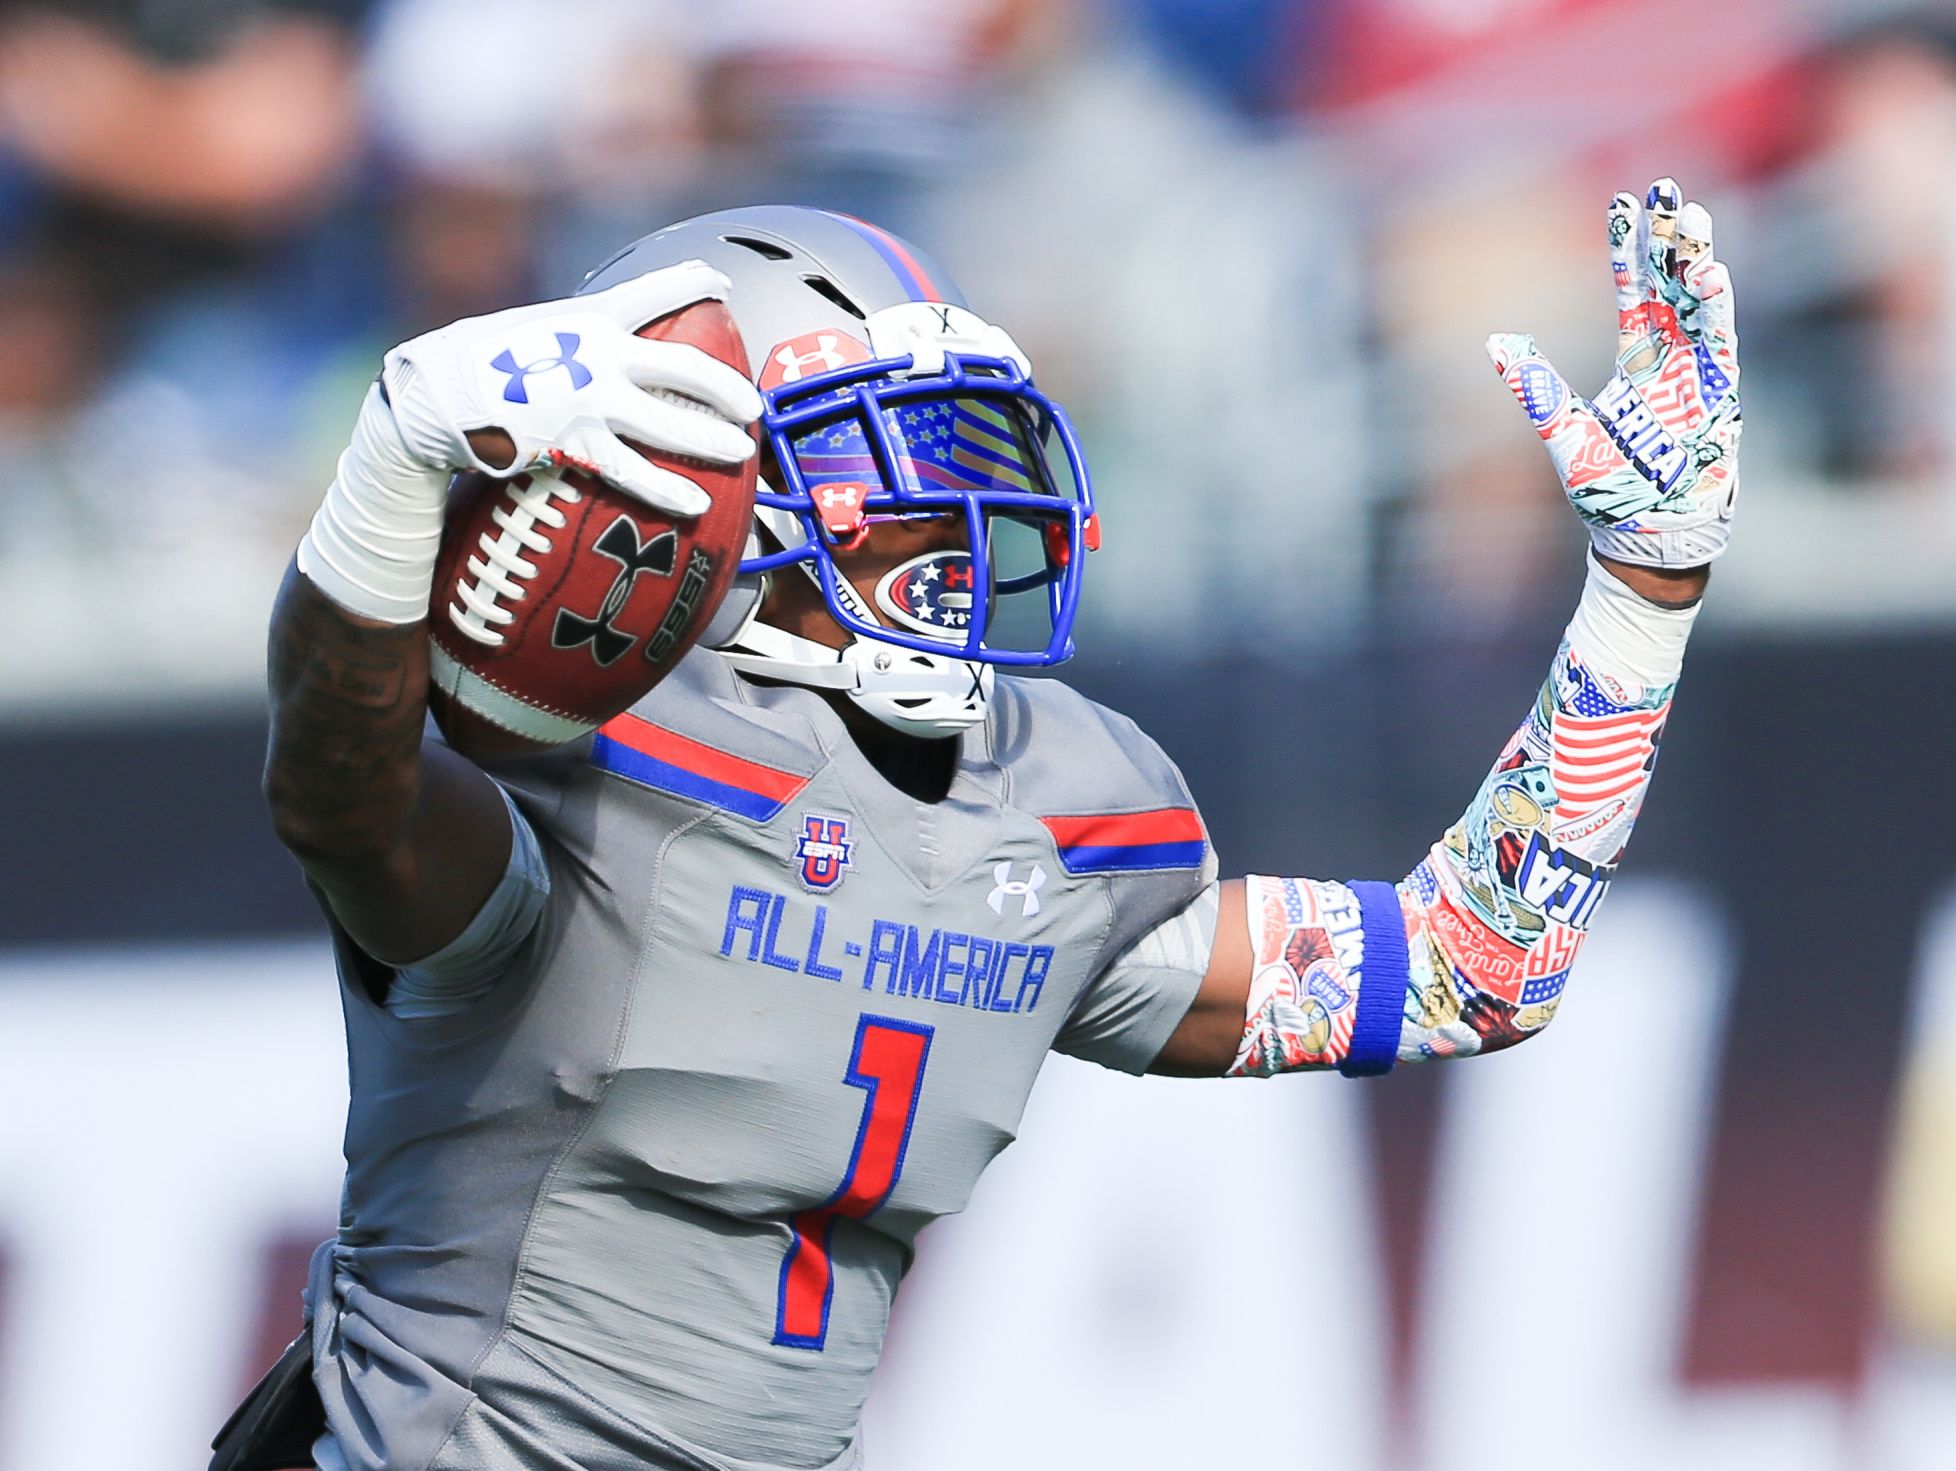 Team Armour wide receiver Jeff Thomas (01) celebrates after scoring a touchdown during the 2017 Under Armour All-America High School Football game. Team Armour defeated Team Highlight 24-21.